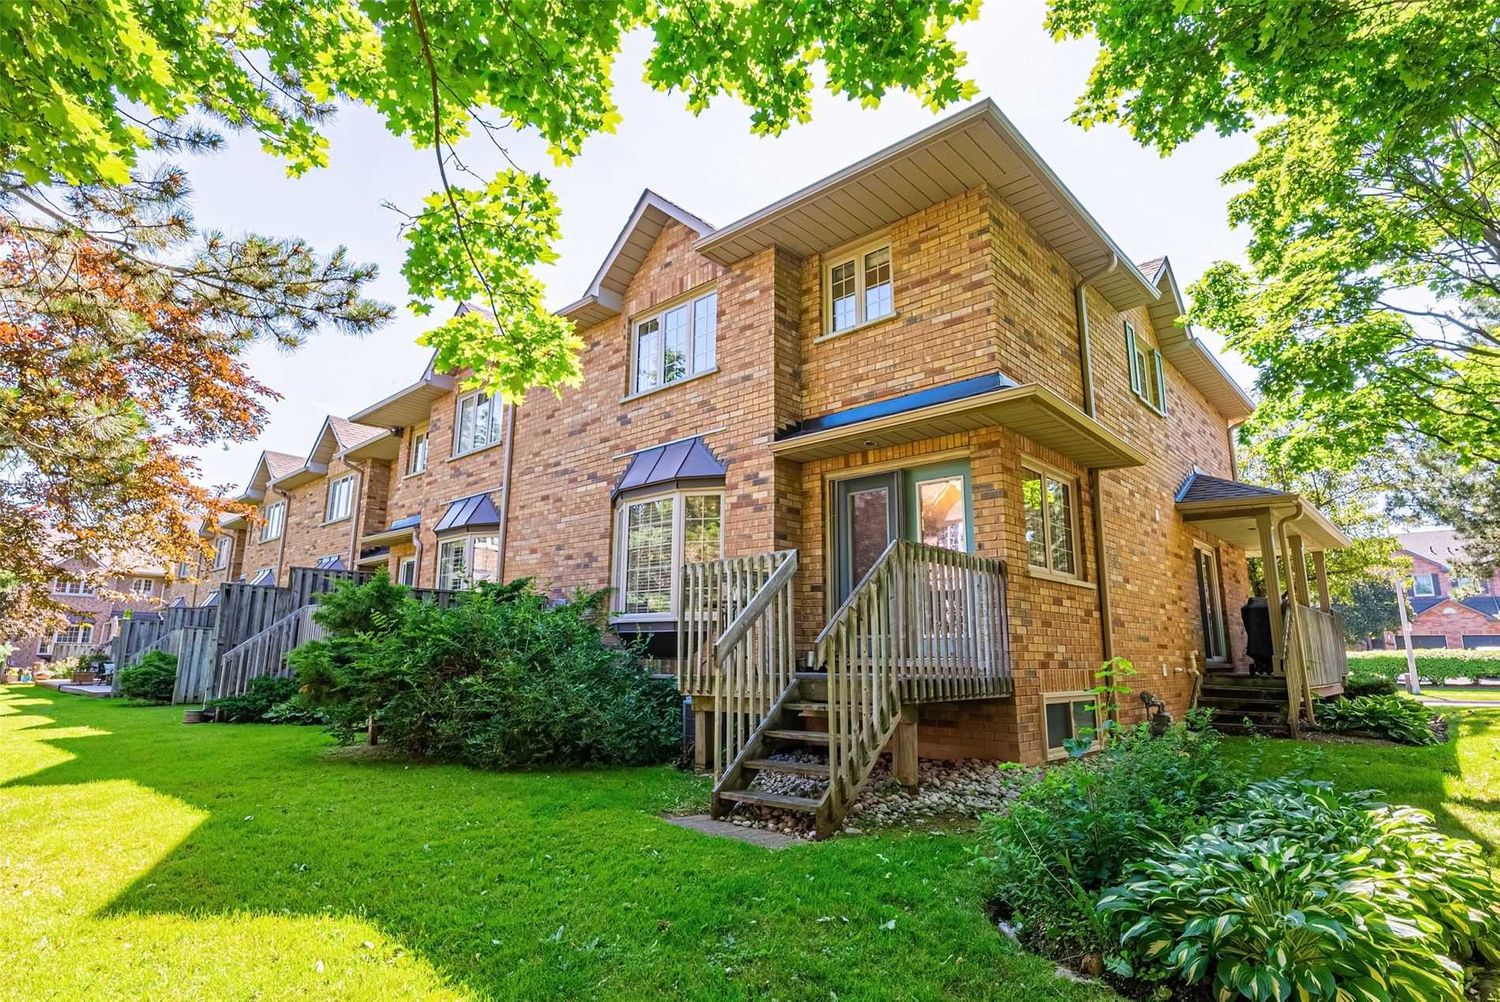 2880 Headon Forest Drive. Governor's Grove Townhomes is located in  Burlington, Toronto - image #3 of 3